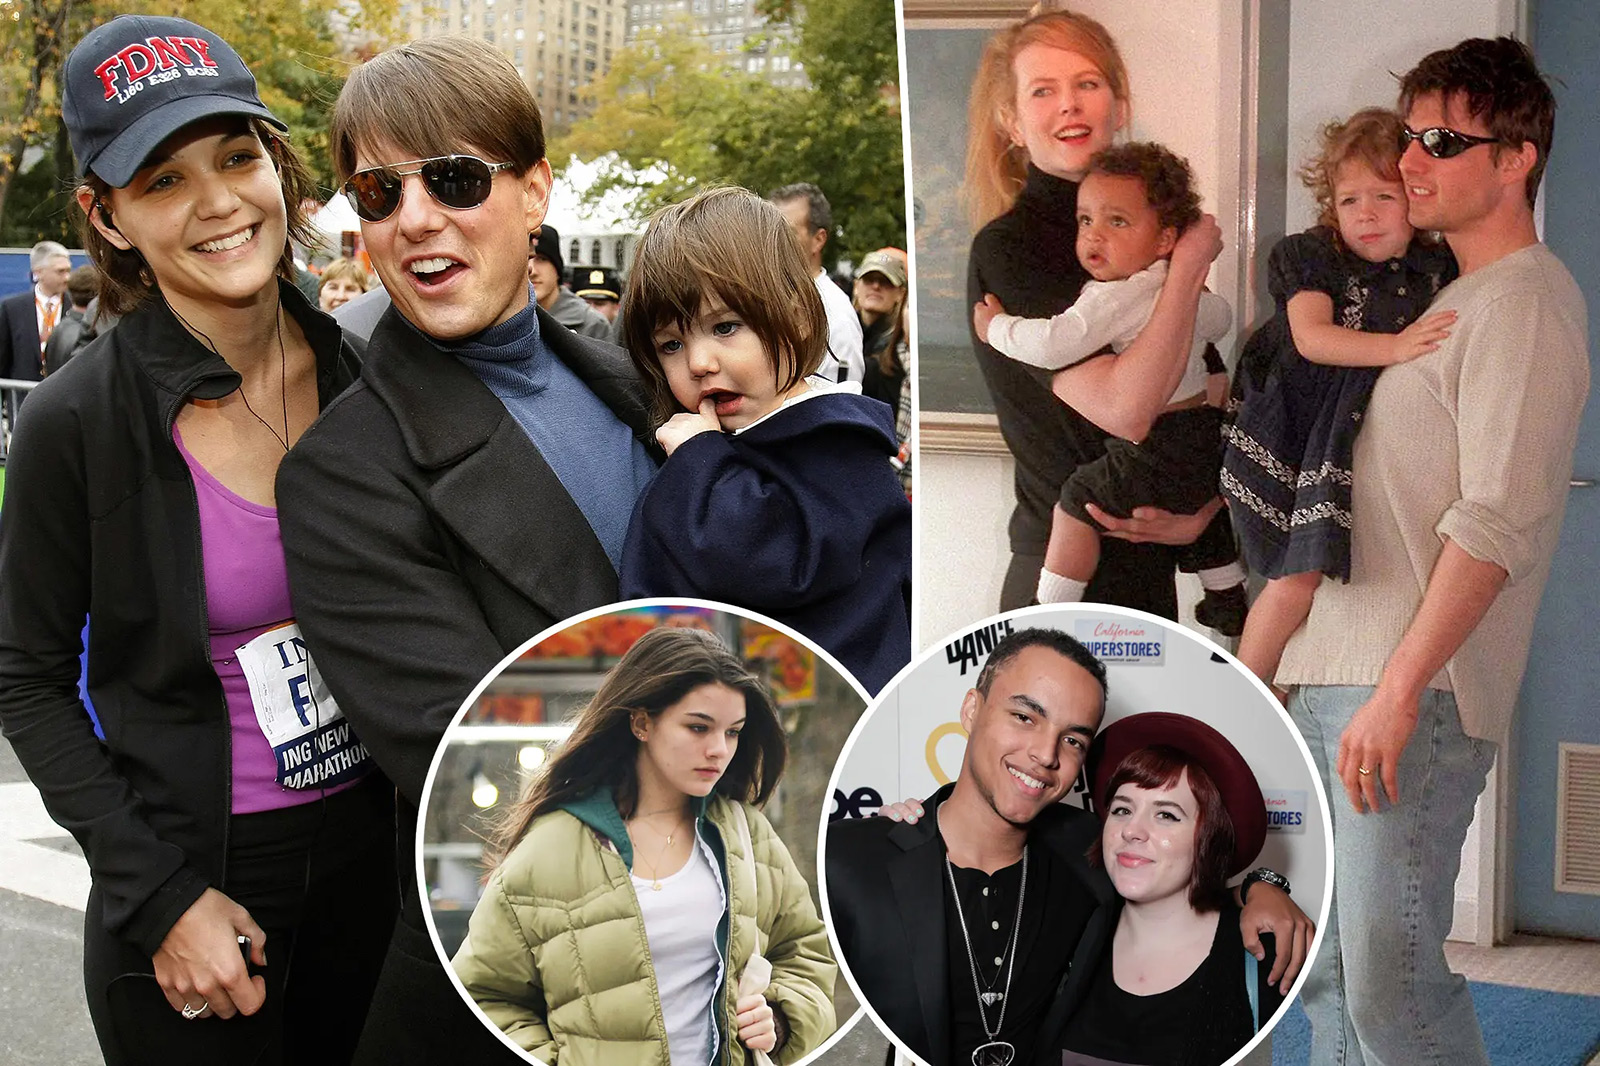 Tom Cruise’s kids: Meet his 3 children including 16-year-old daughter Suri